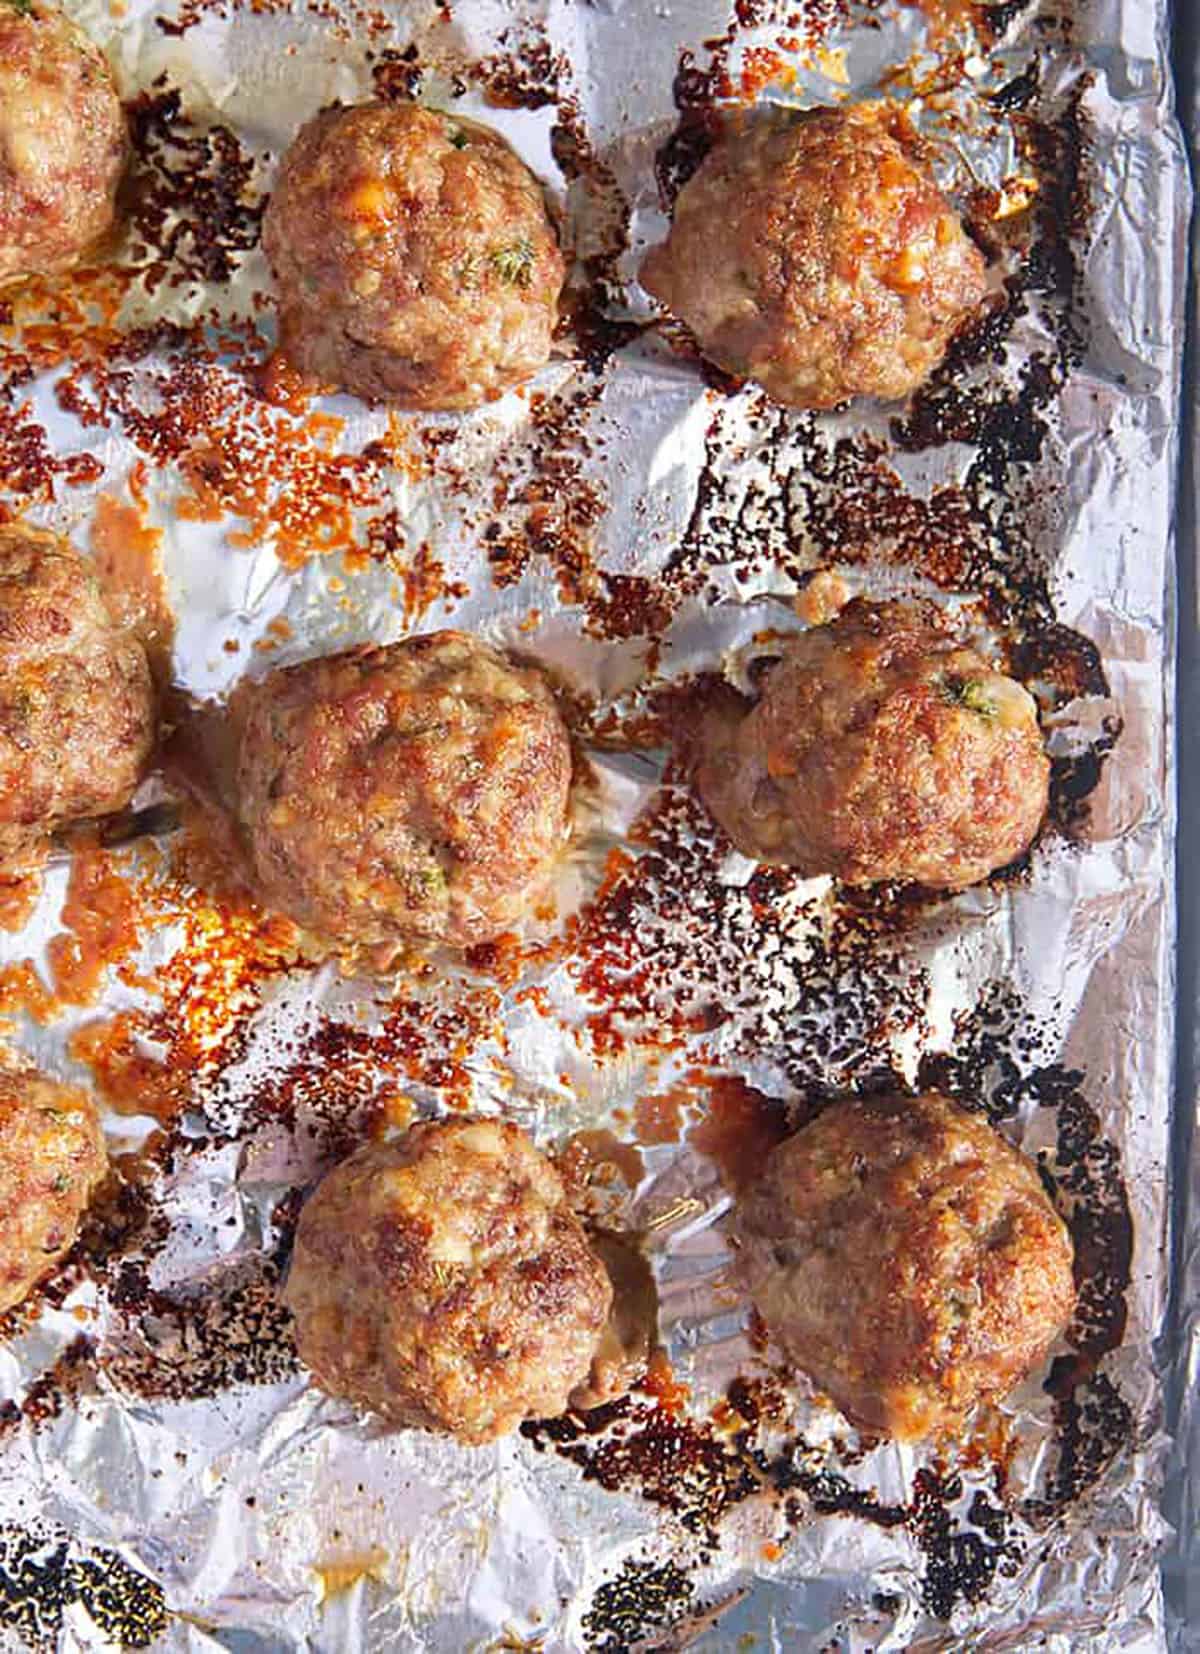 Baked meatballs on a baking sheet with foil.